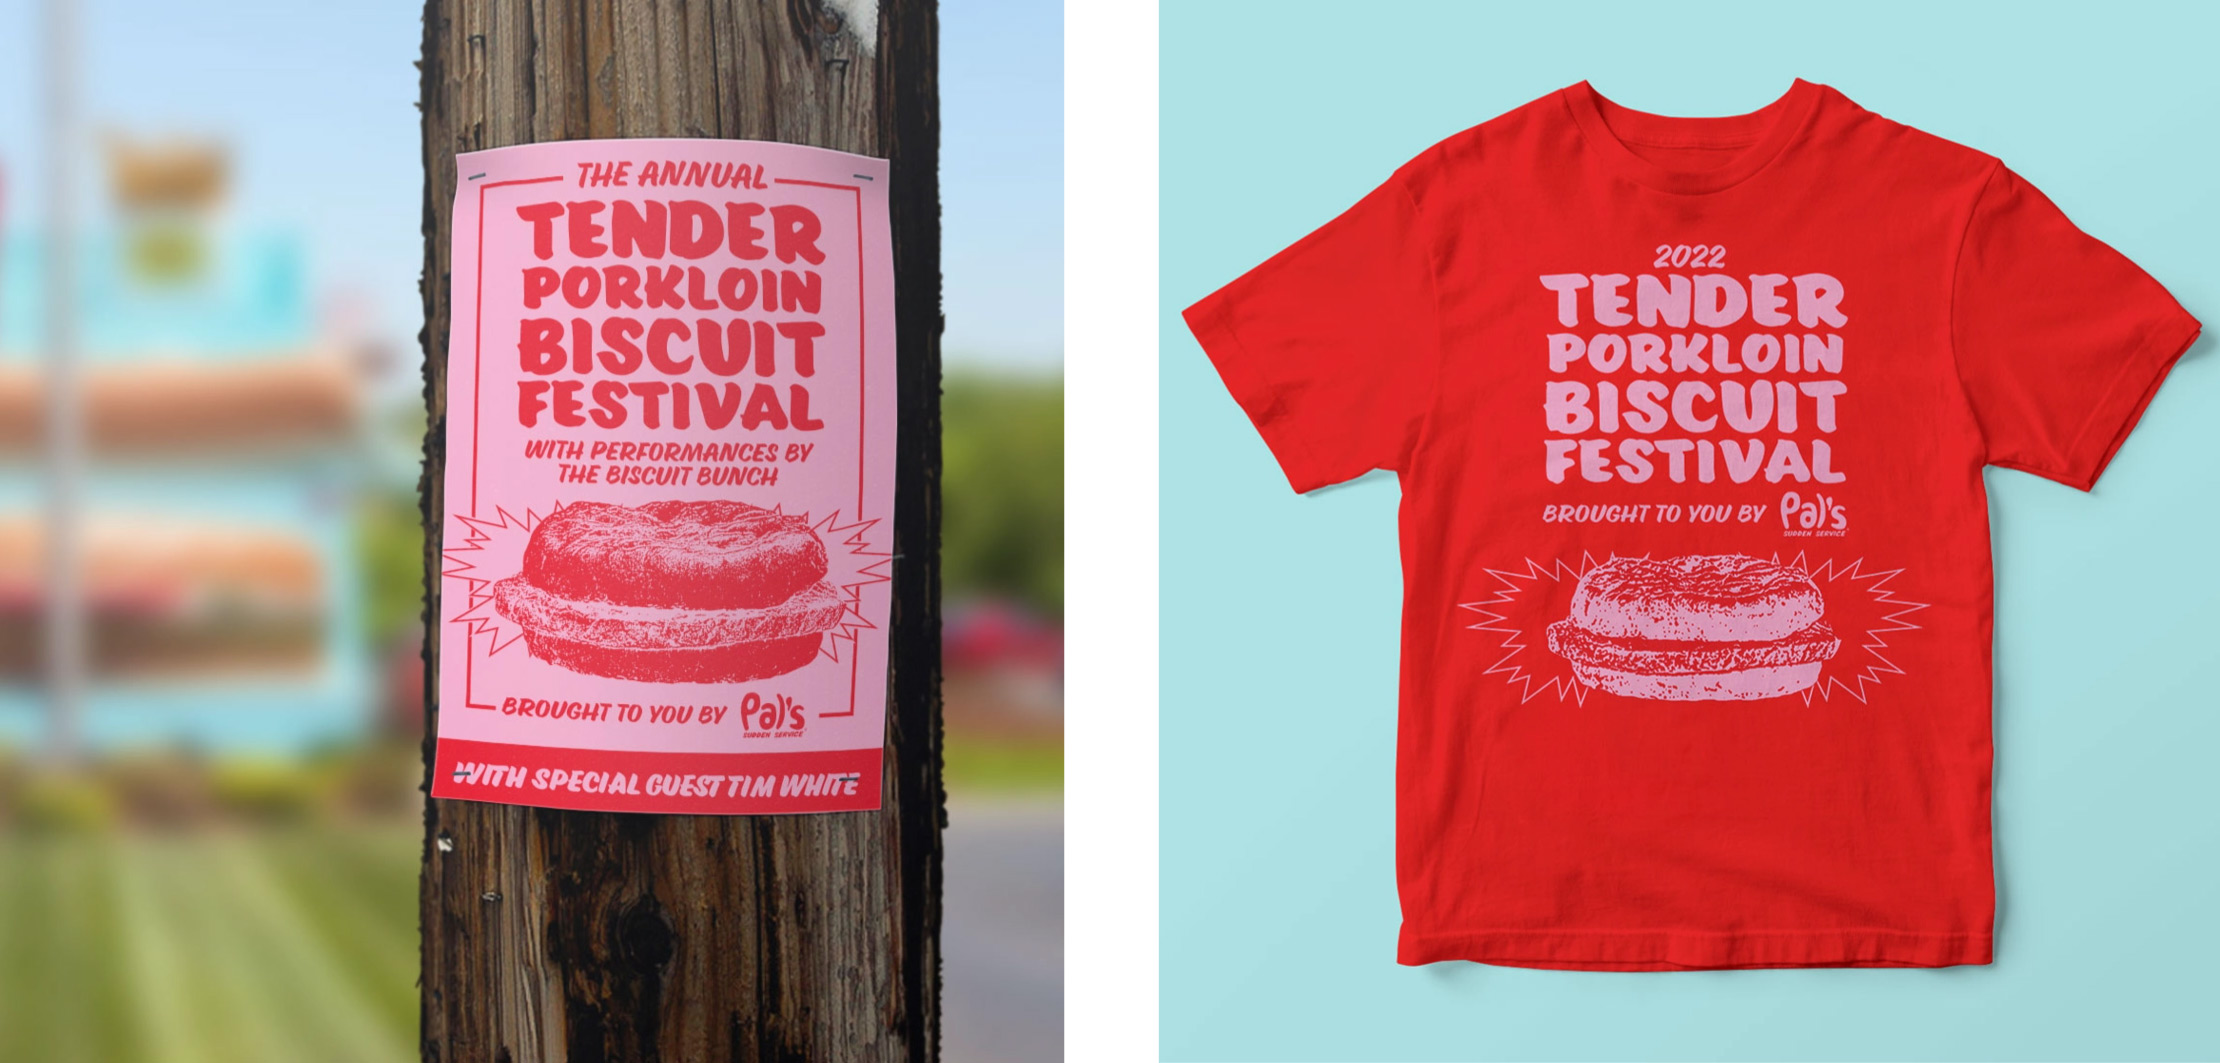 Creative Energy - Pal's Sudden Service - Tender Pork Loin Biscuit Flyer and T-shirt